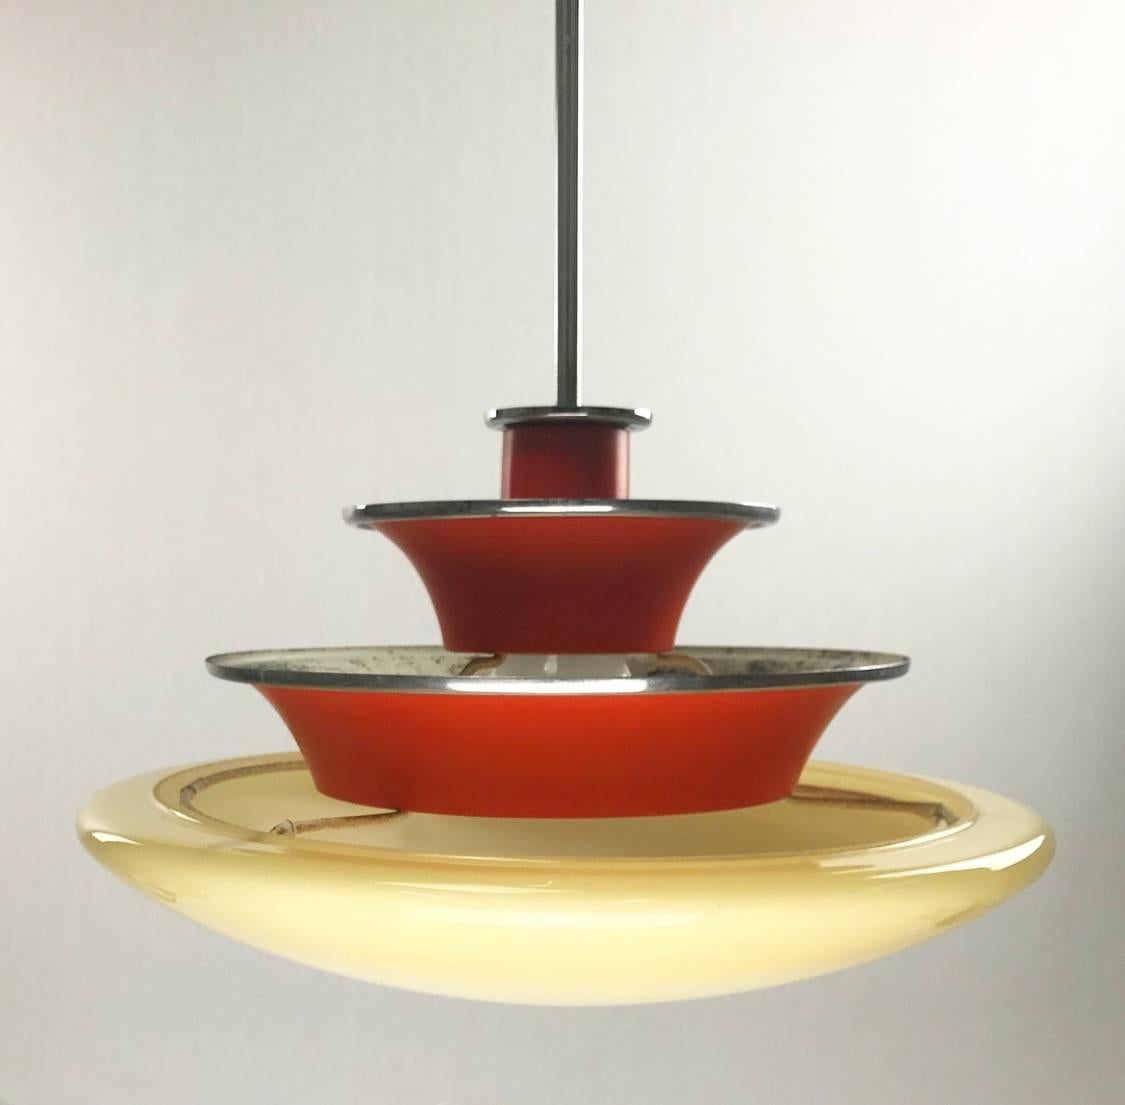 Extremely rare piece of Swedish Art Deco by Böhlmarks, mid-1930s.

The chandelier consists of a chrome canopy and rod, red/orange lacquered top shades and creme colored bottom opaline glass. 

Condition: Urestored because condition is stunning. No